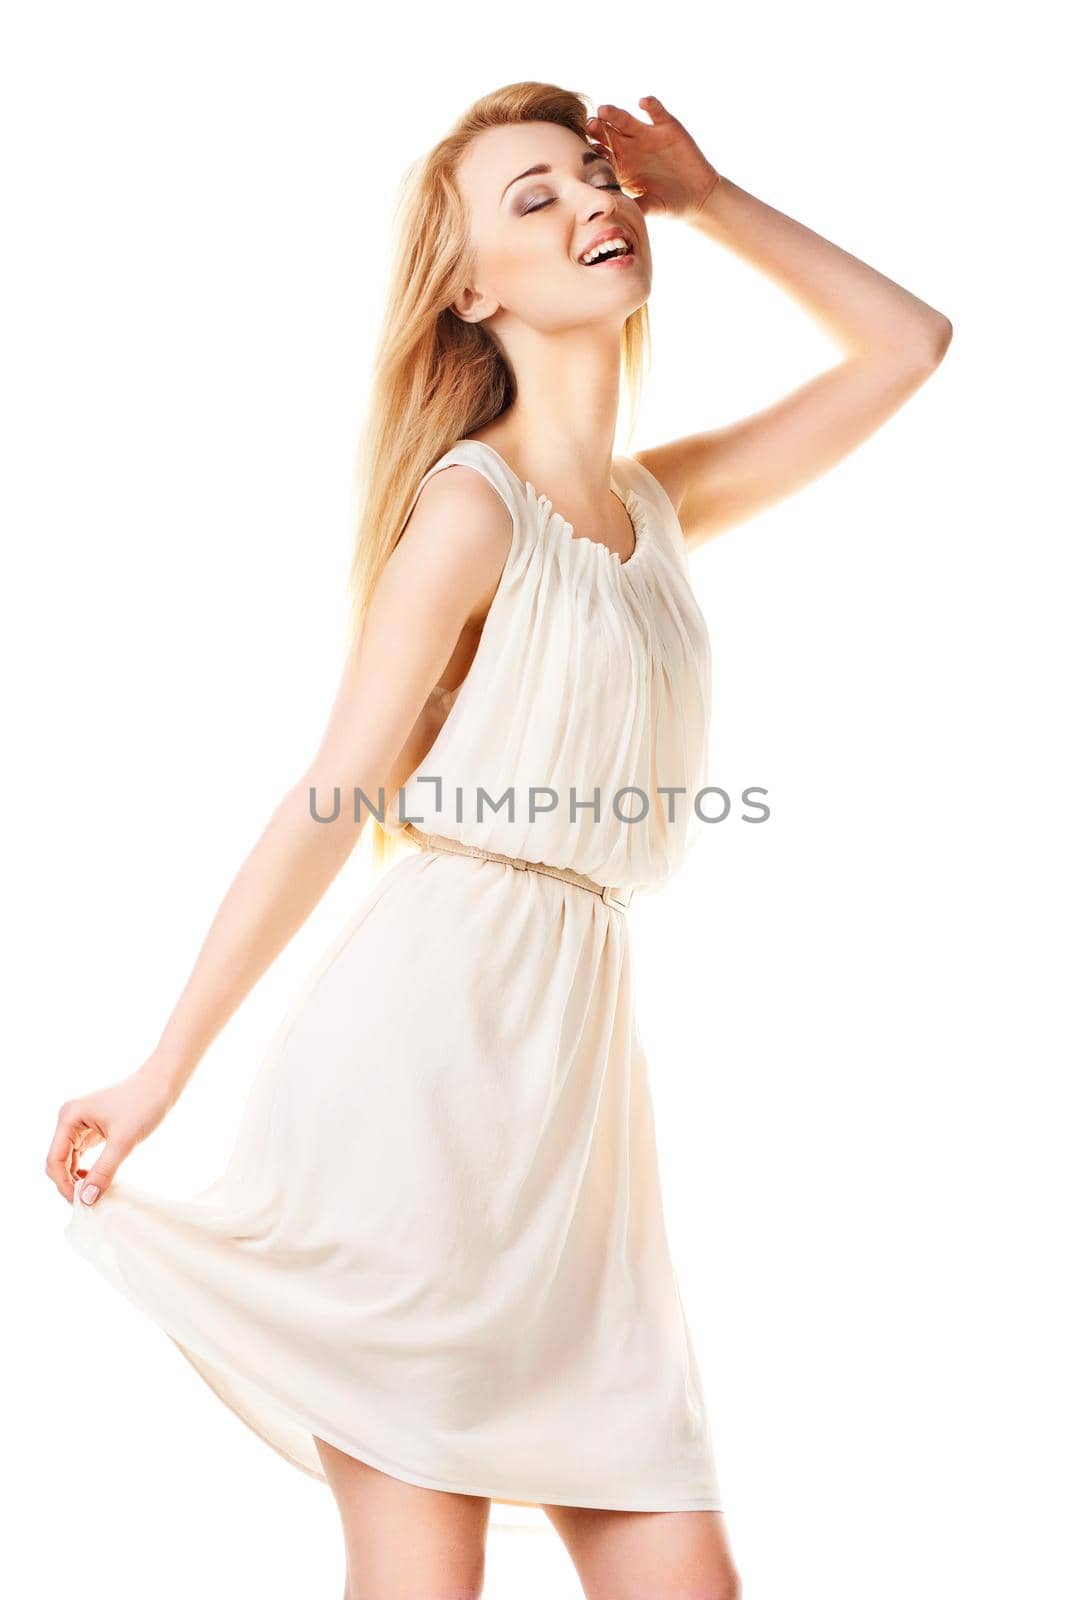 Laughing blond woman with long hair on white by Julenochek